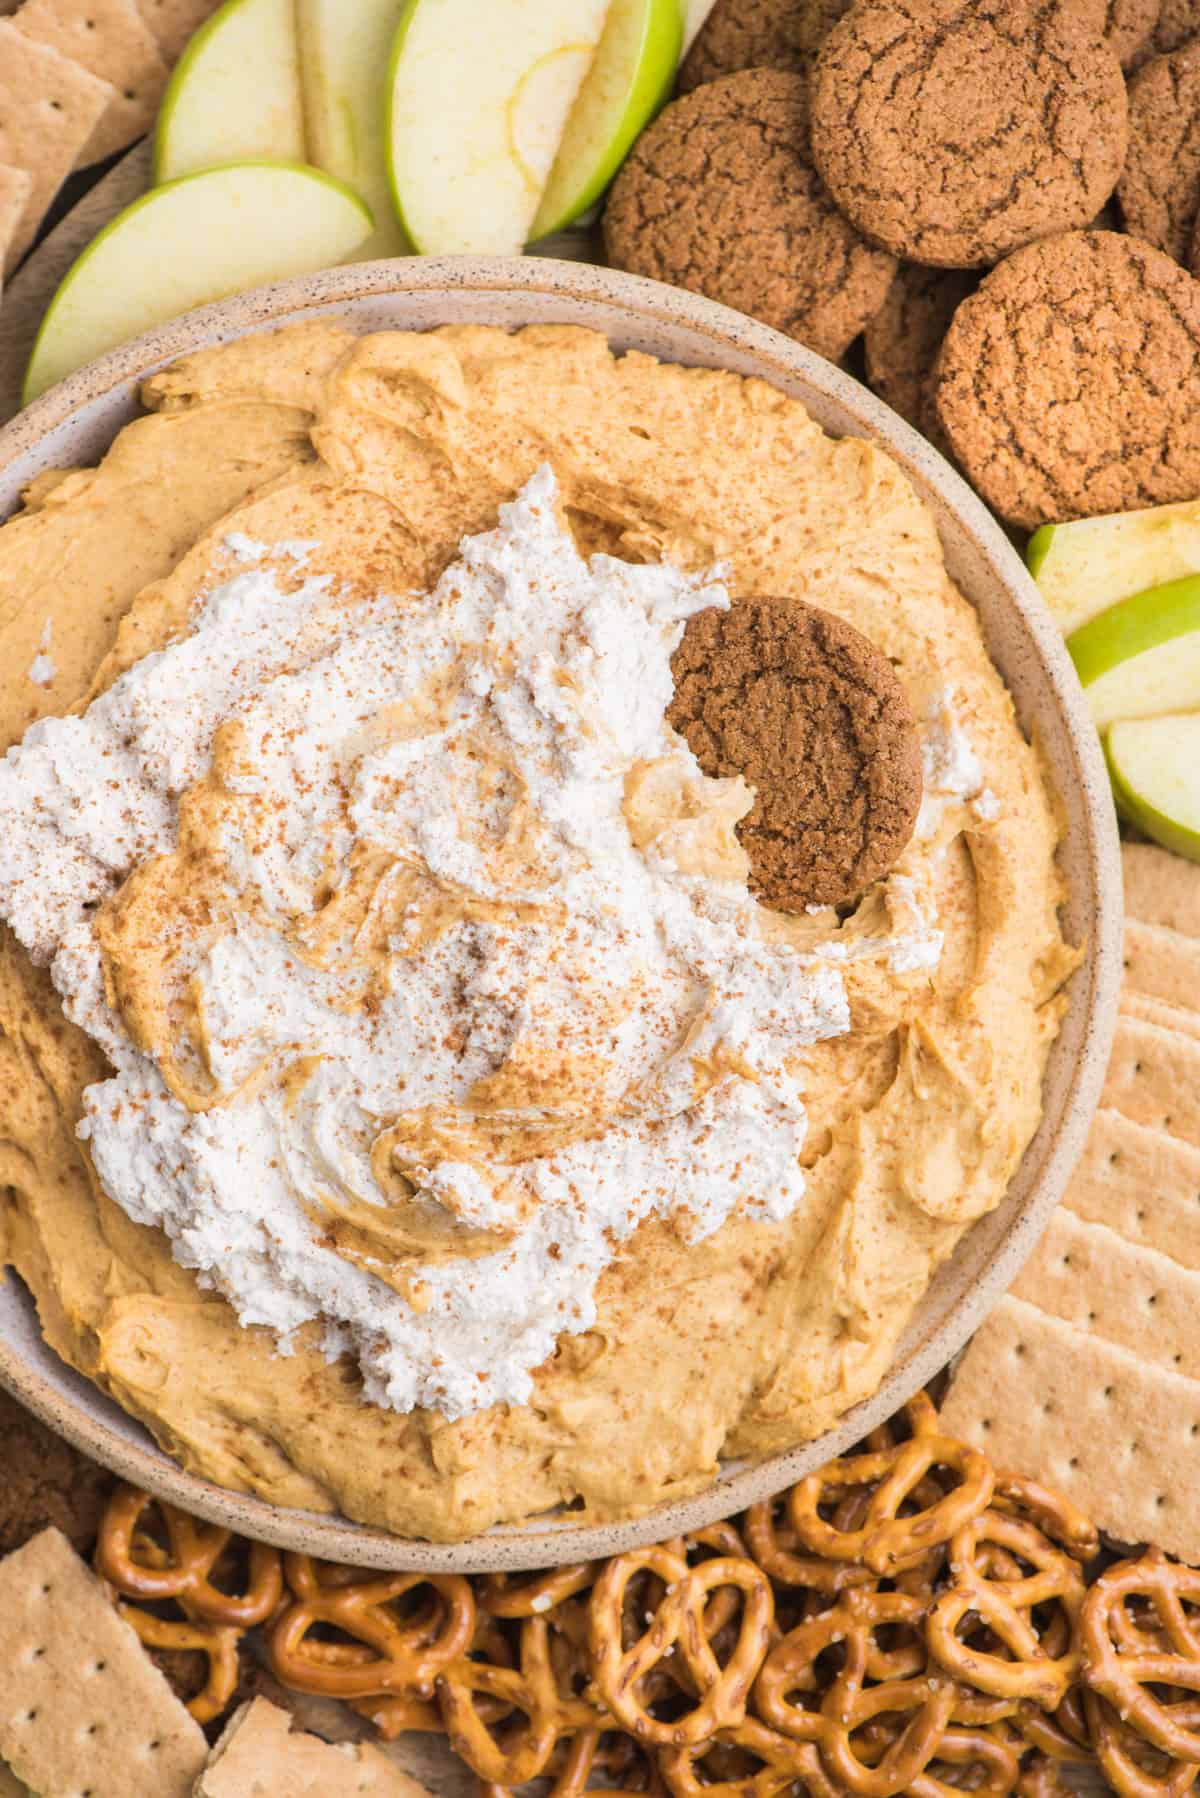 pumpkin dip with whipped cream topping in a bowl surrounded by piles of pretzels, gingersnaps, graham crackers and green apple slices